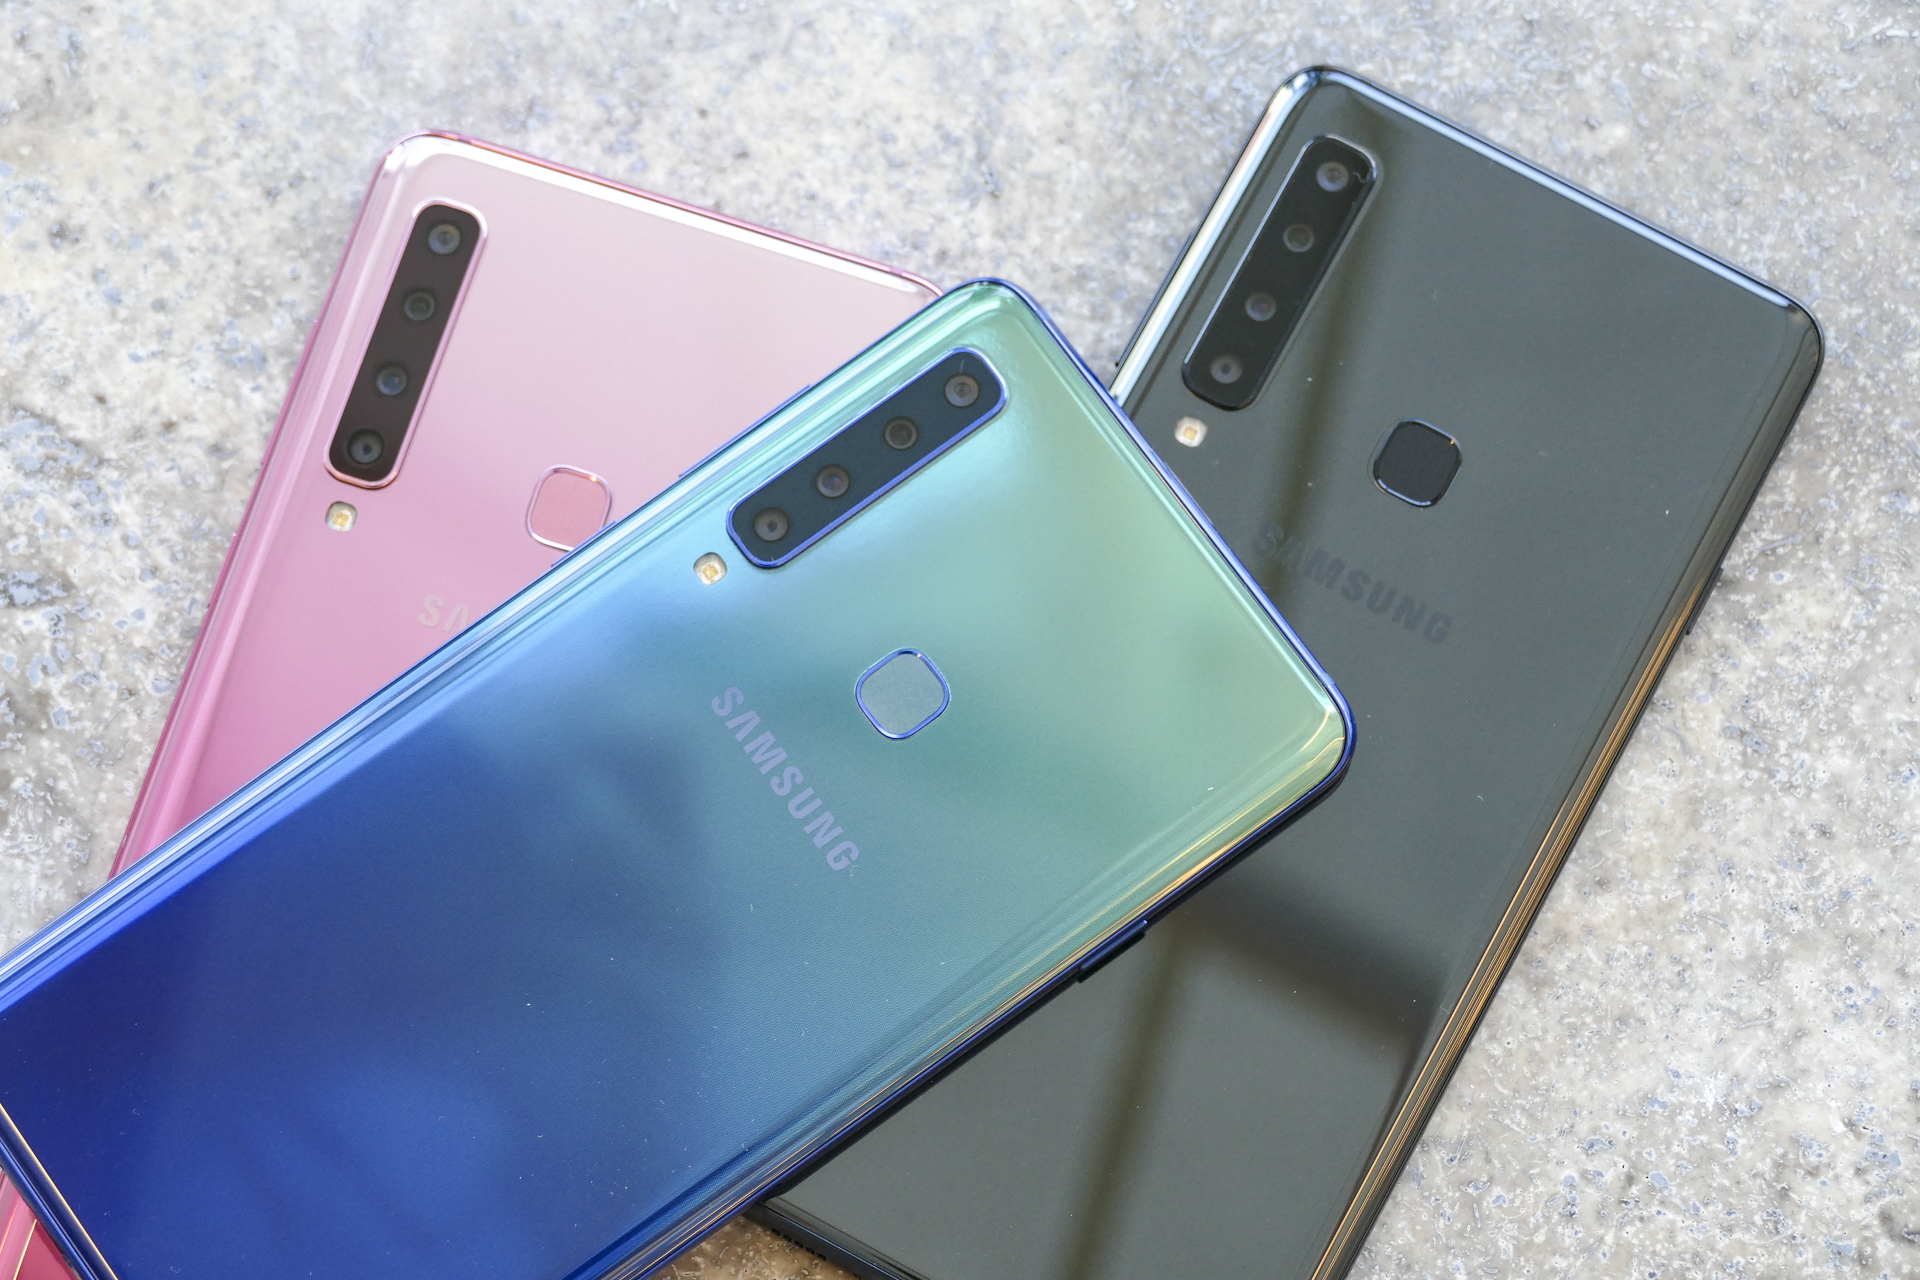 Galaxy A32 becomes Samsung's first mid-range phone with 90Hz